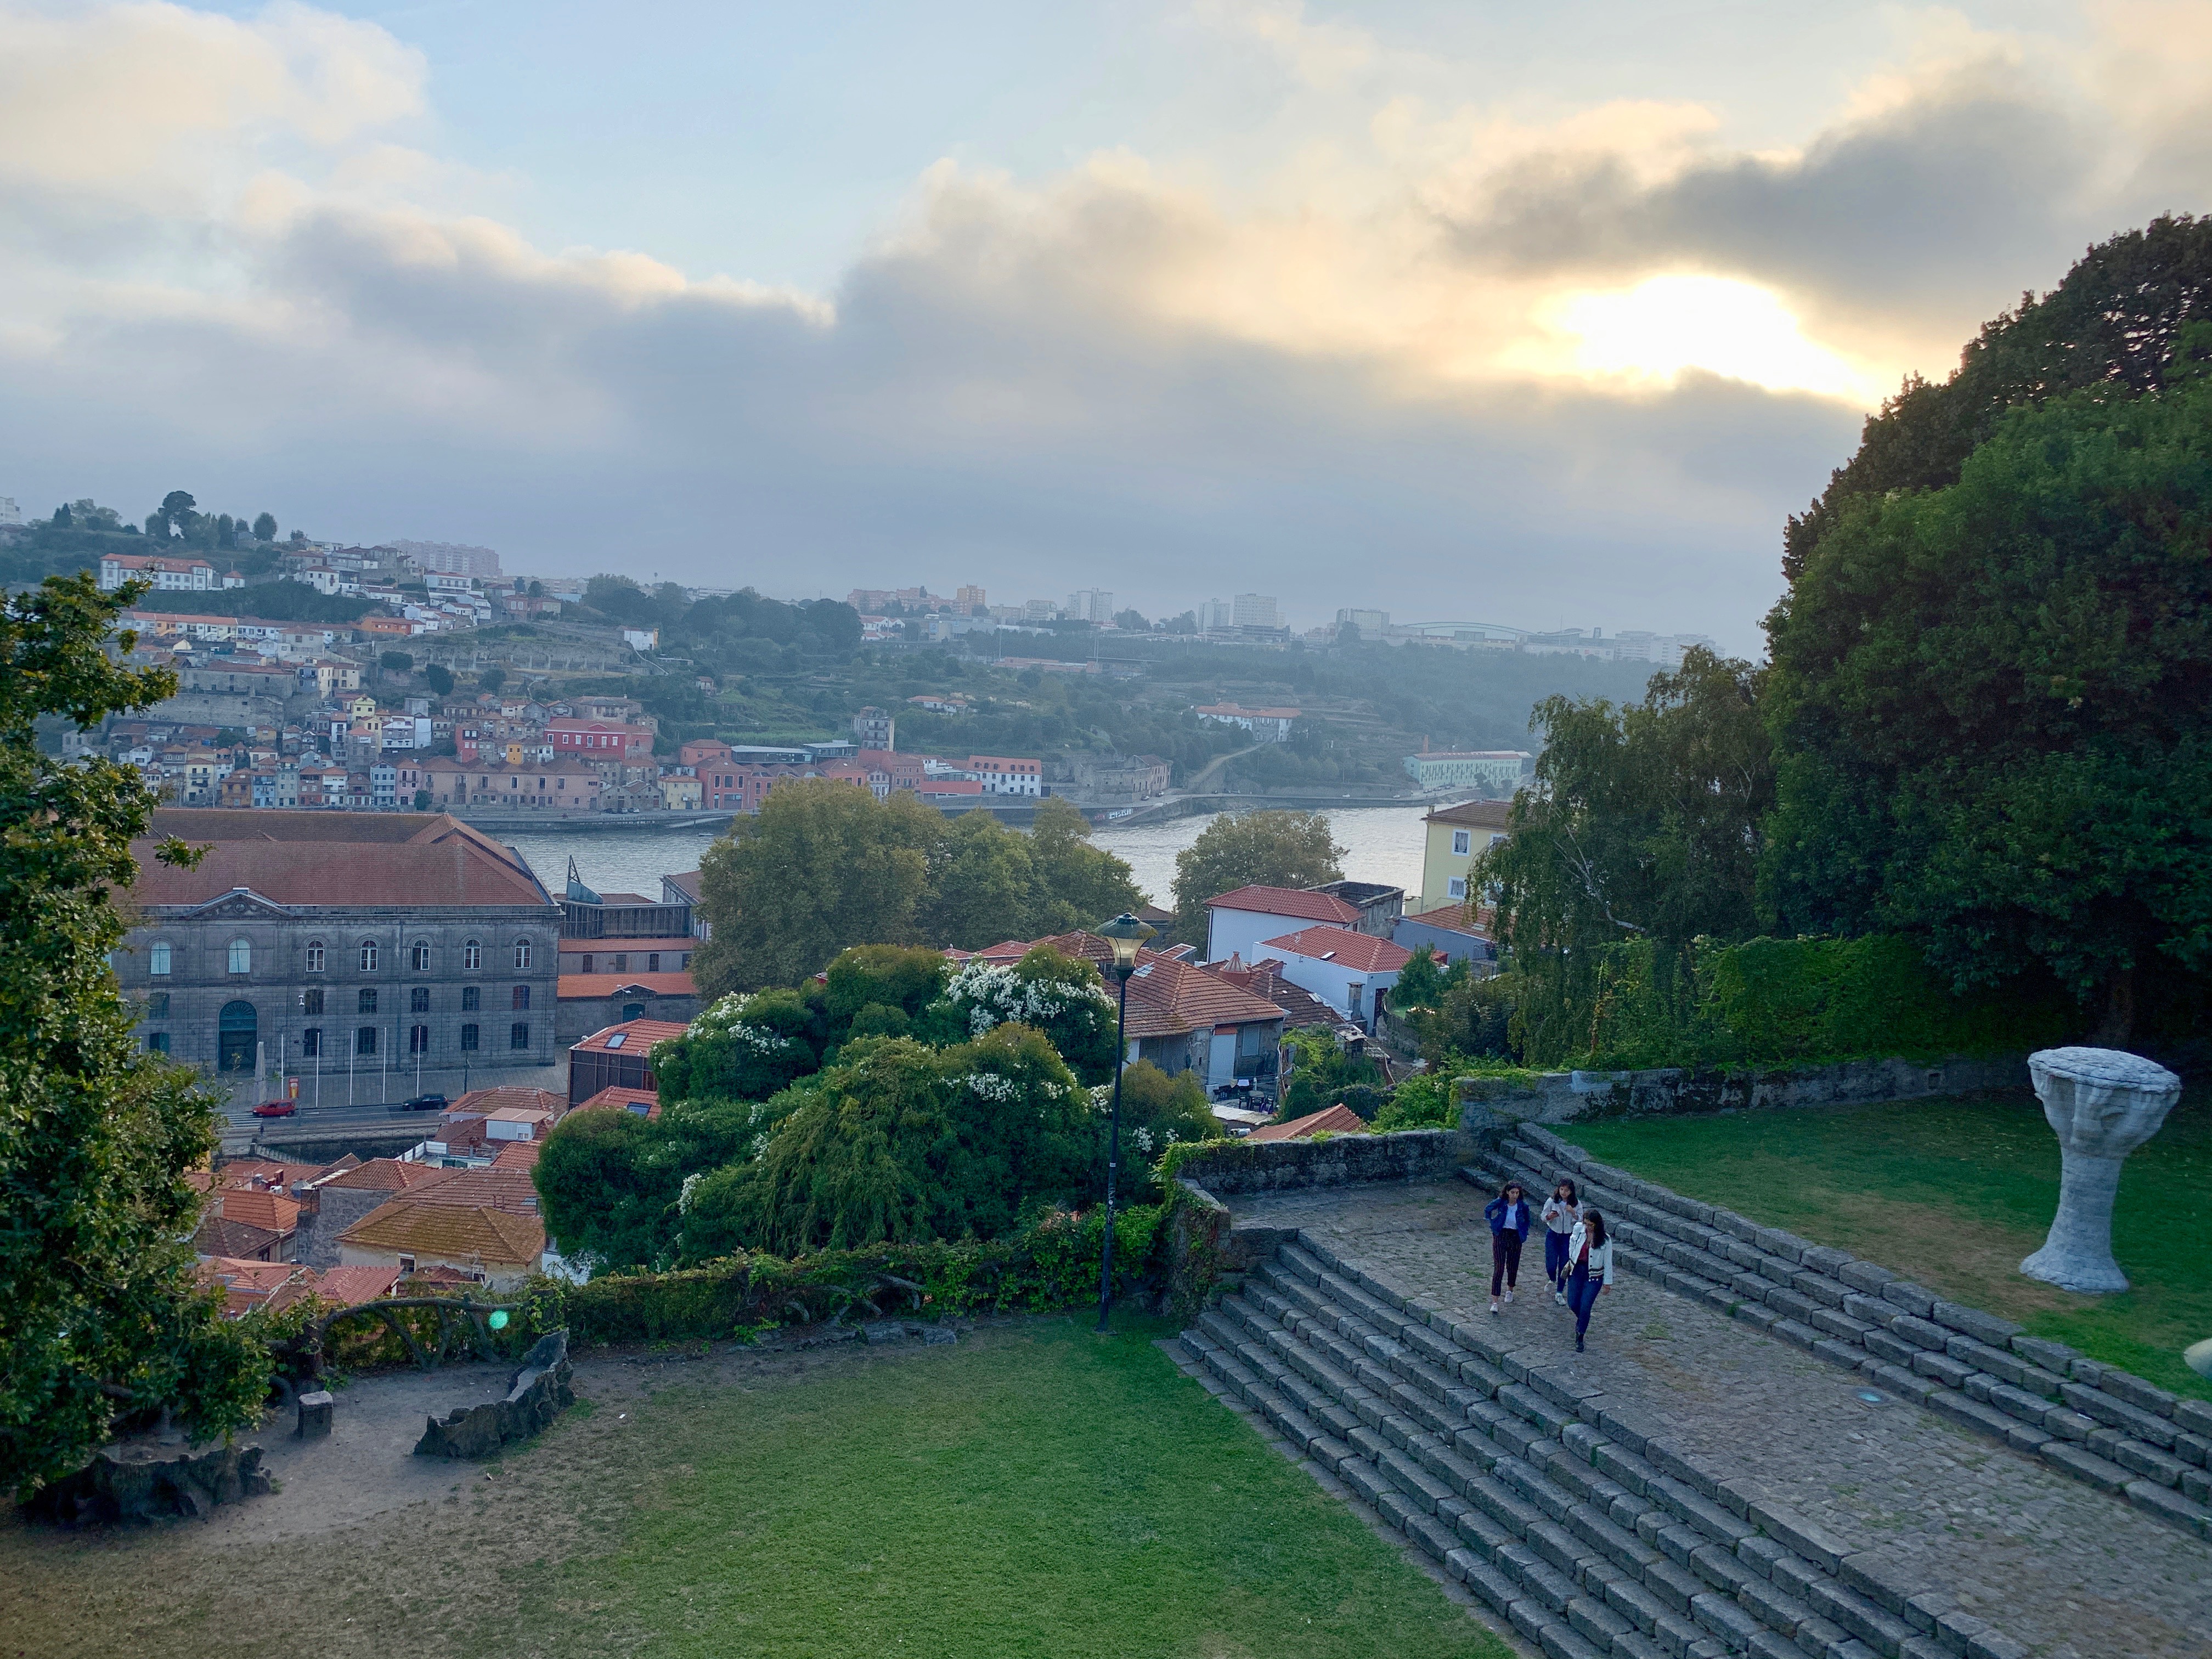 The grassy terraces of Parque das Virtudes overlooking the Douro river near sunset